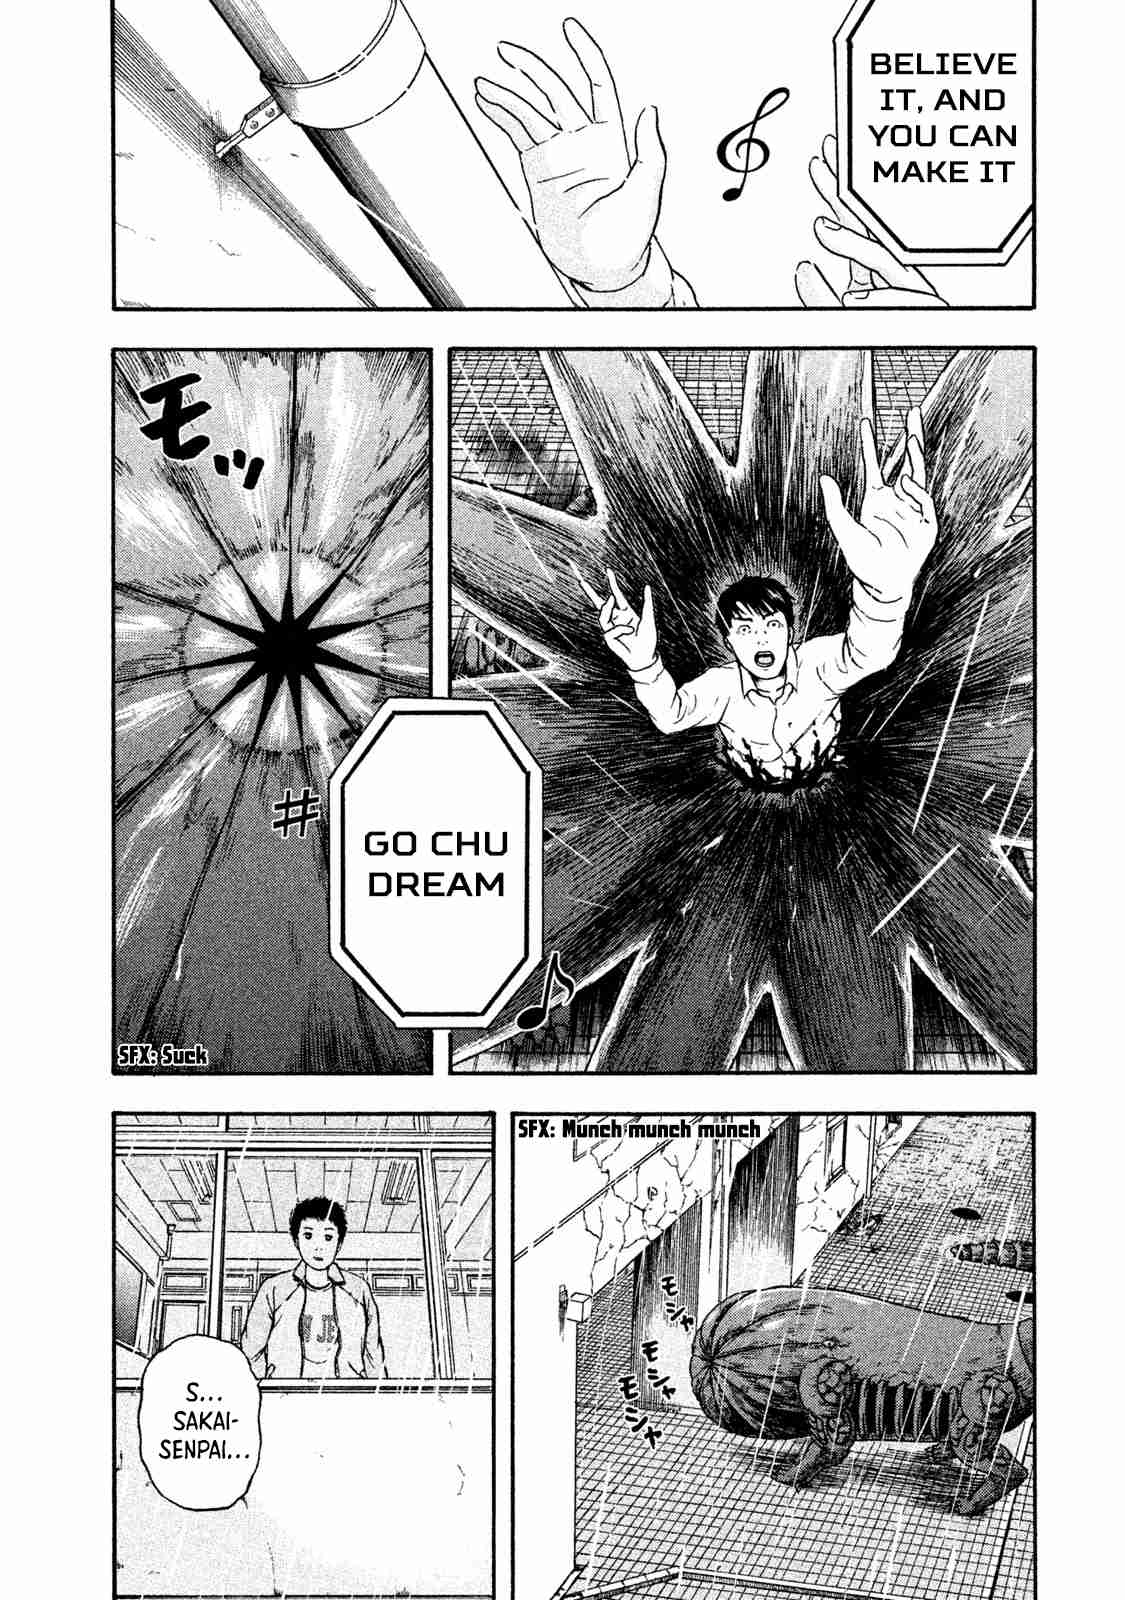 It's Time to Go to His Stomach, OK? Vol. 1 Ch. 6